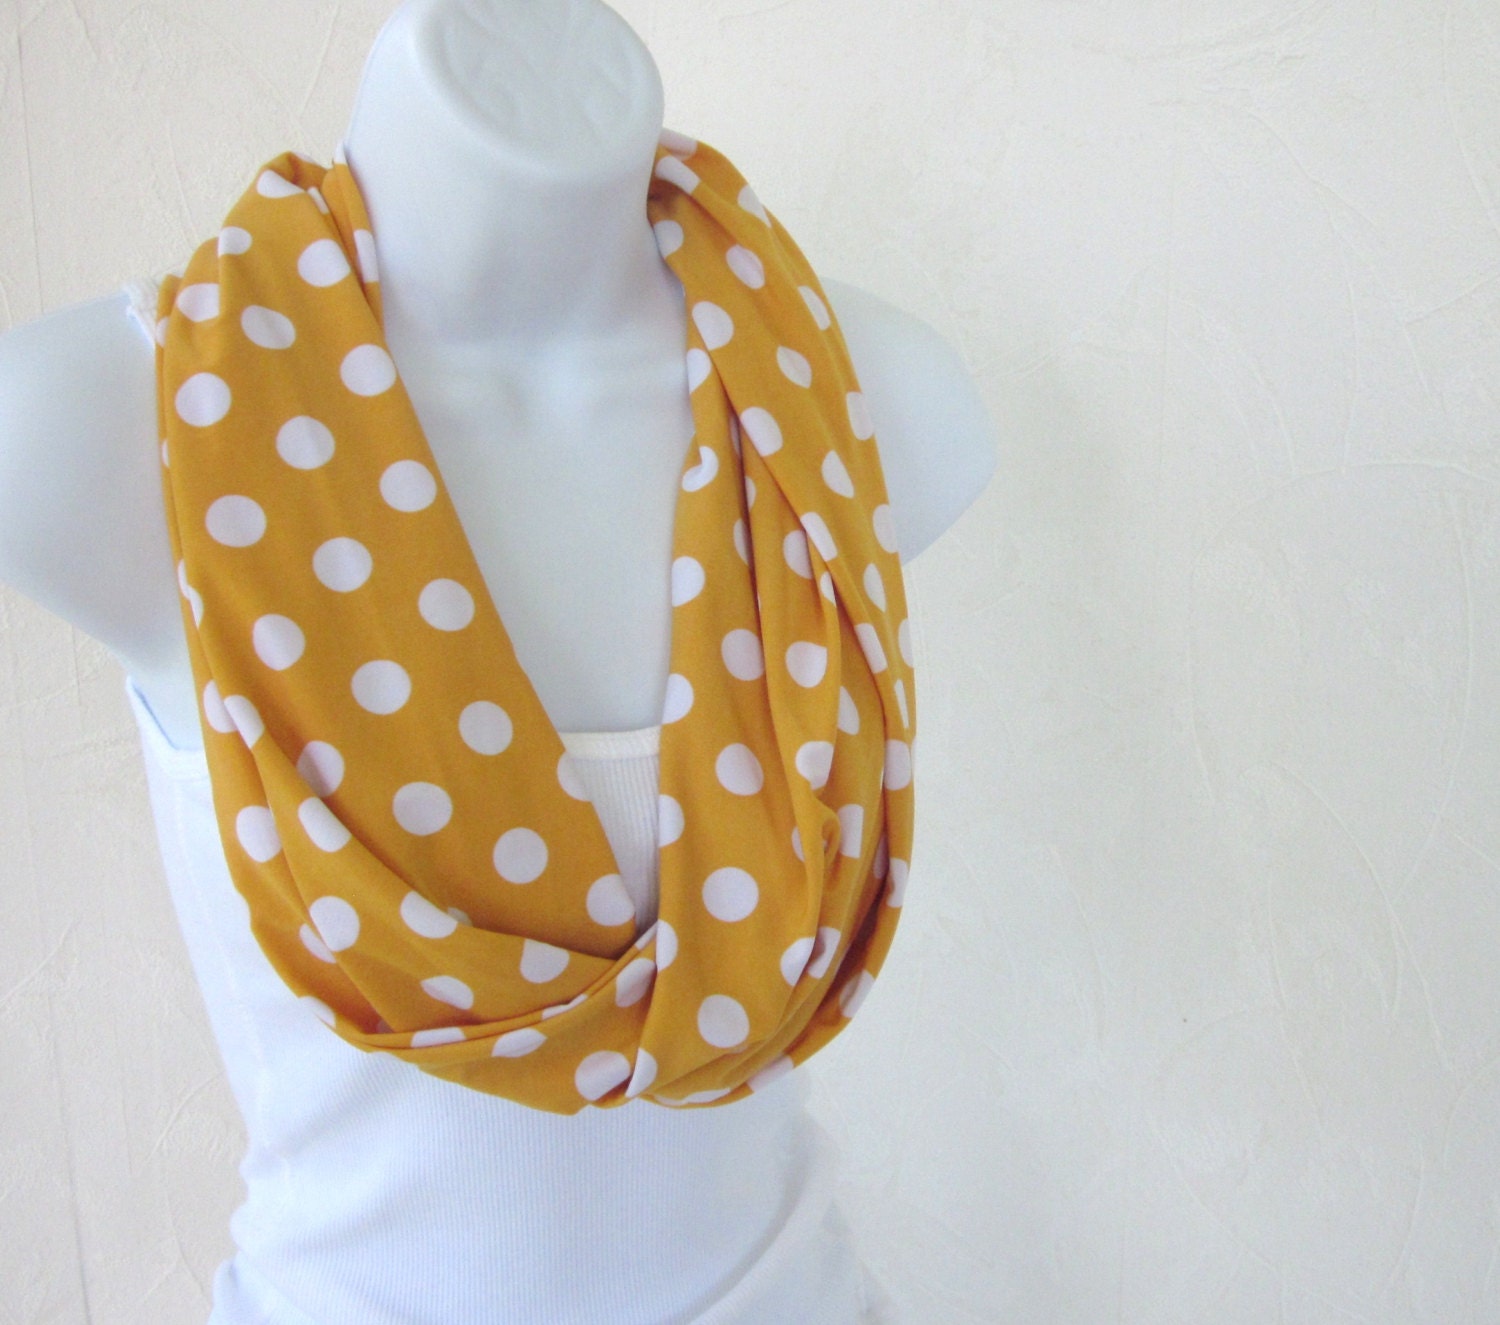 Polka Dot Infinity Scarf Golden Maize Yellow Jersey Knit Single Loop Scarf Summer Fashion Handmade by Thimbledoodle - thimbledoodle